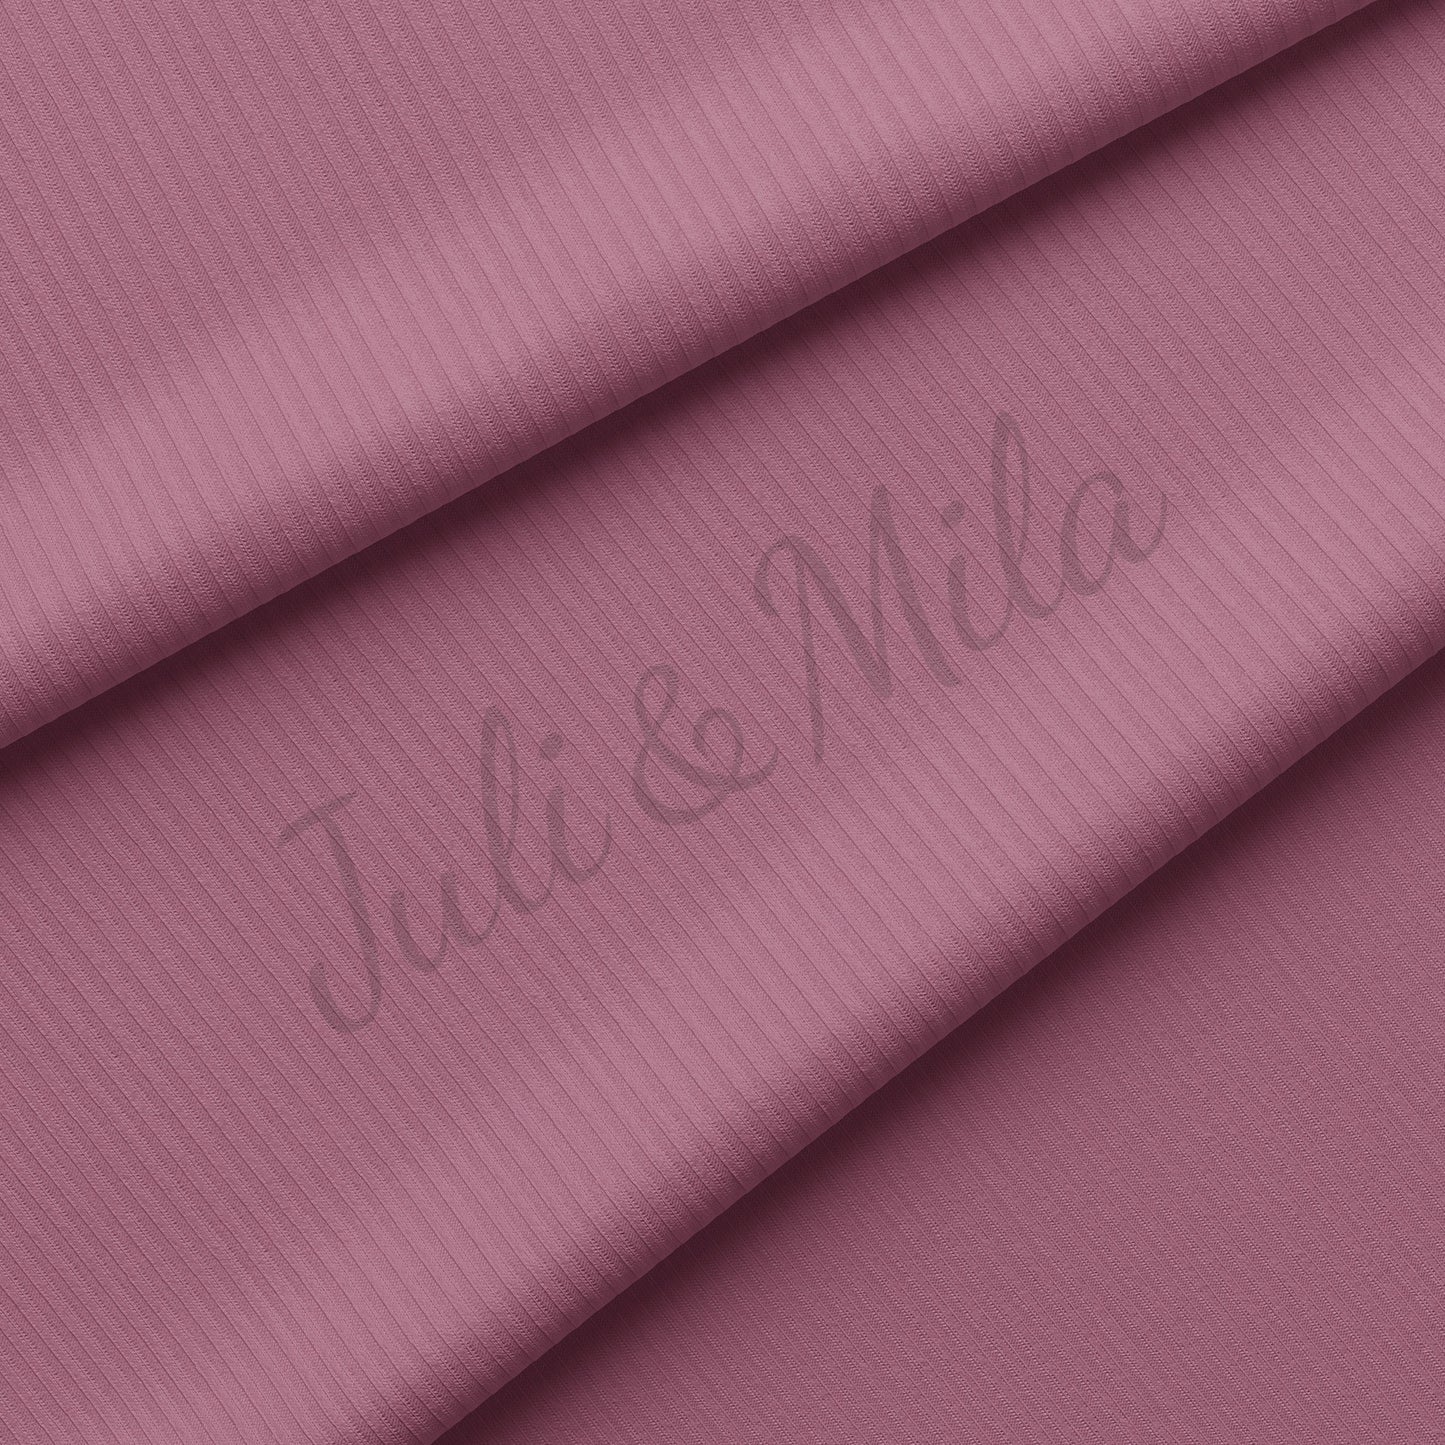 Mauve Rib Knit Fabric by the Yard Ribbed Jersey Stretchy Soft Polyester Stretch Fabric 1 Yard